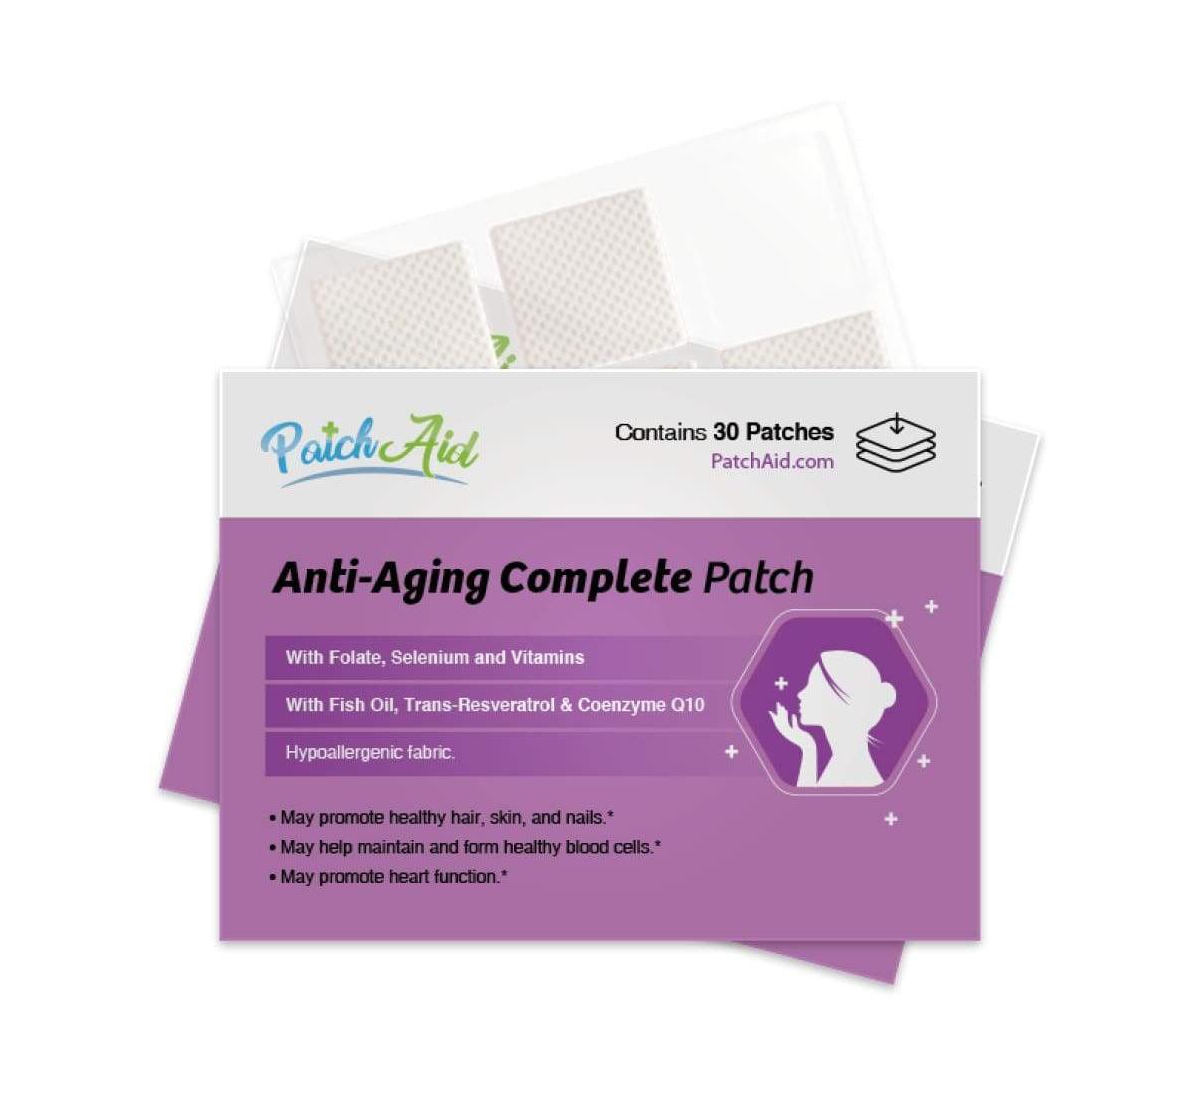 Anti-Aging Complete Topical Vitamin Patch by PatchAid (30-Day Supply) - White